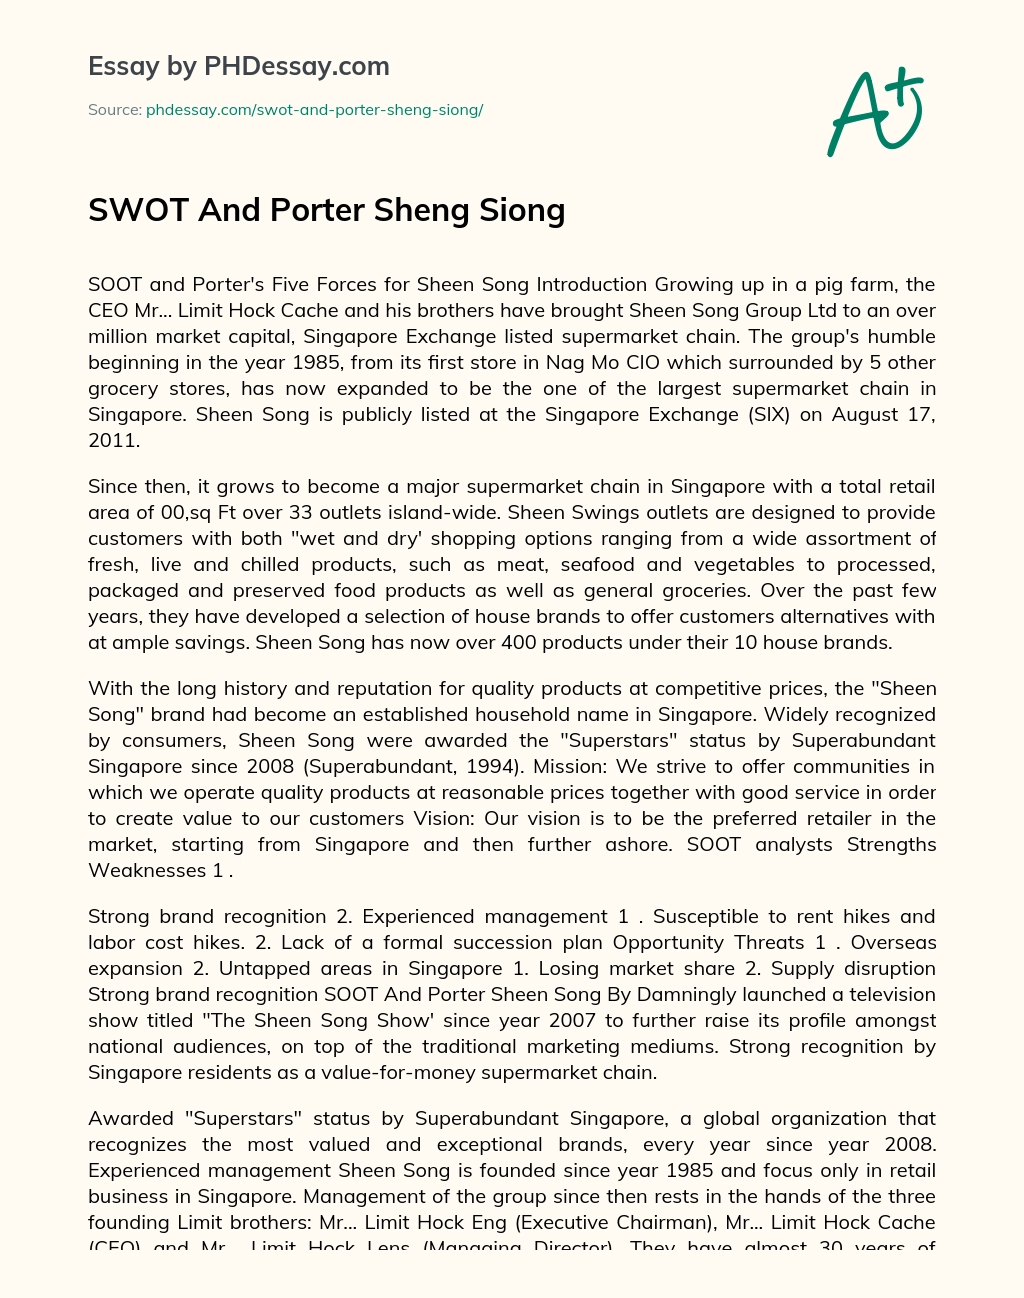 SWOT And Porter Sheng Siong essay